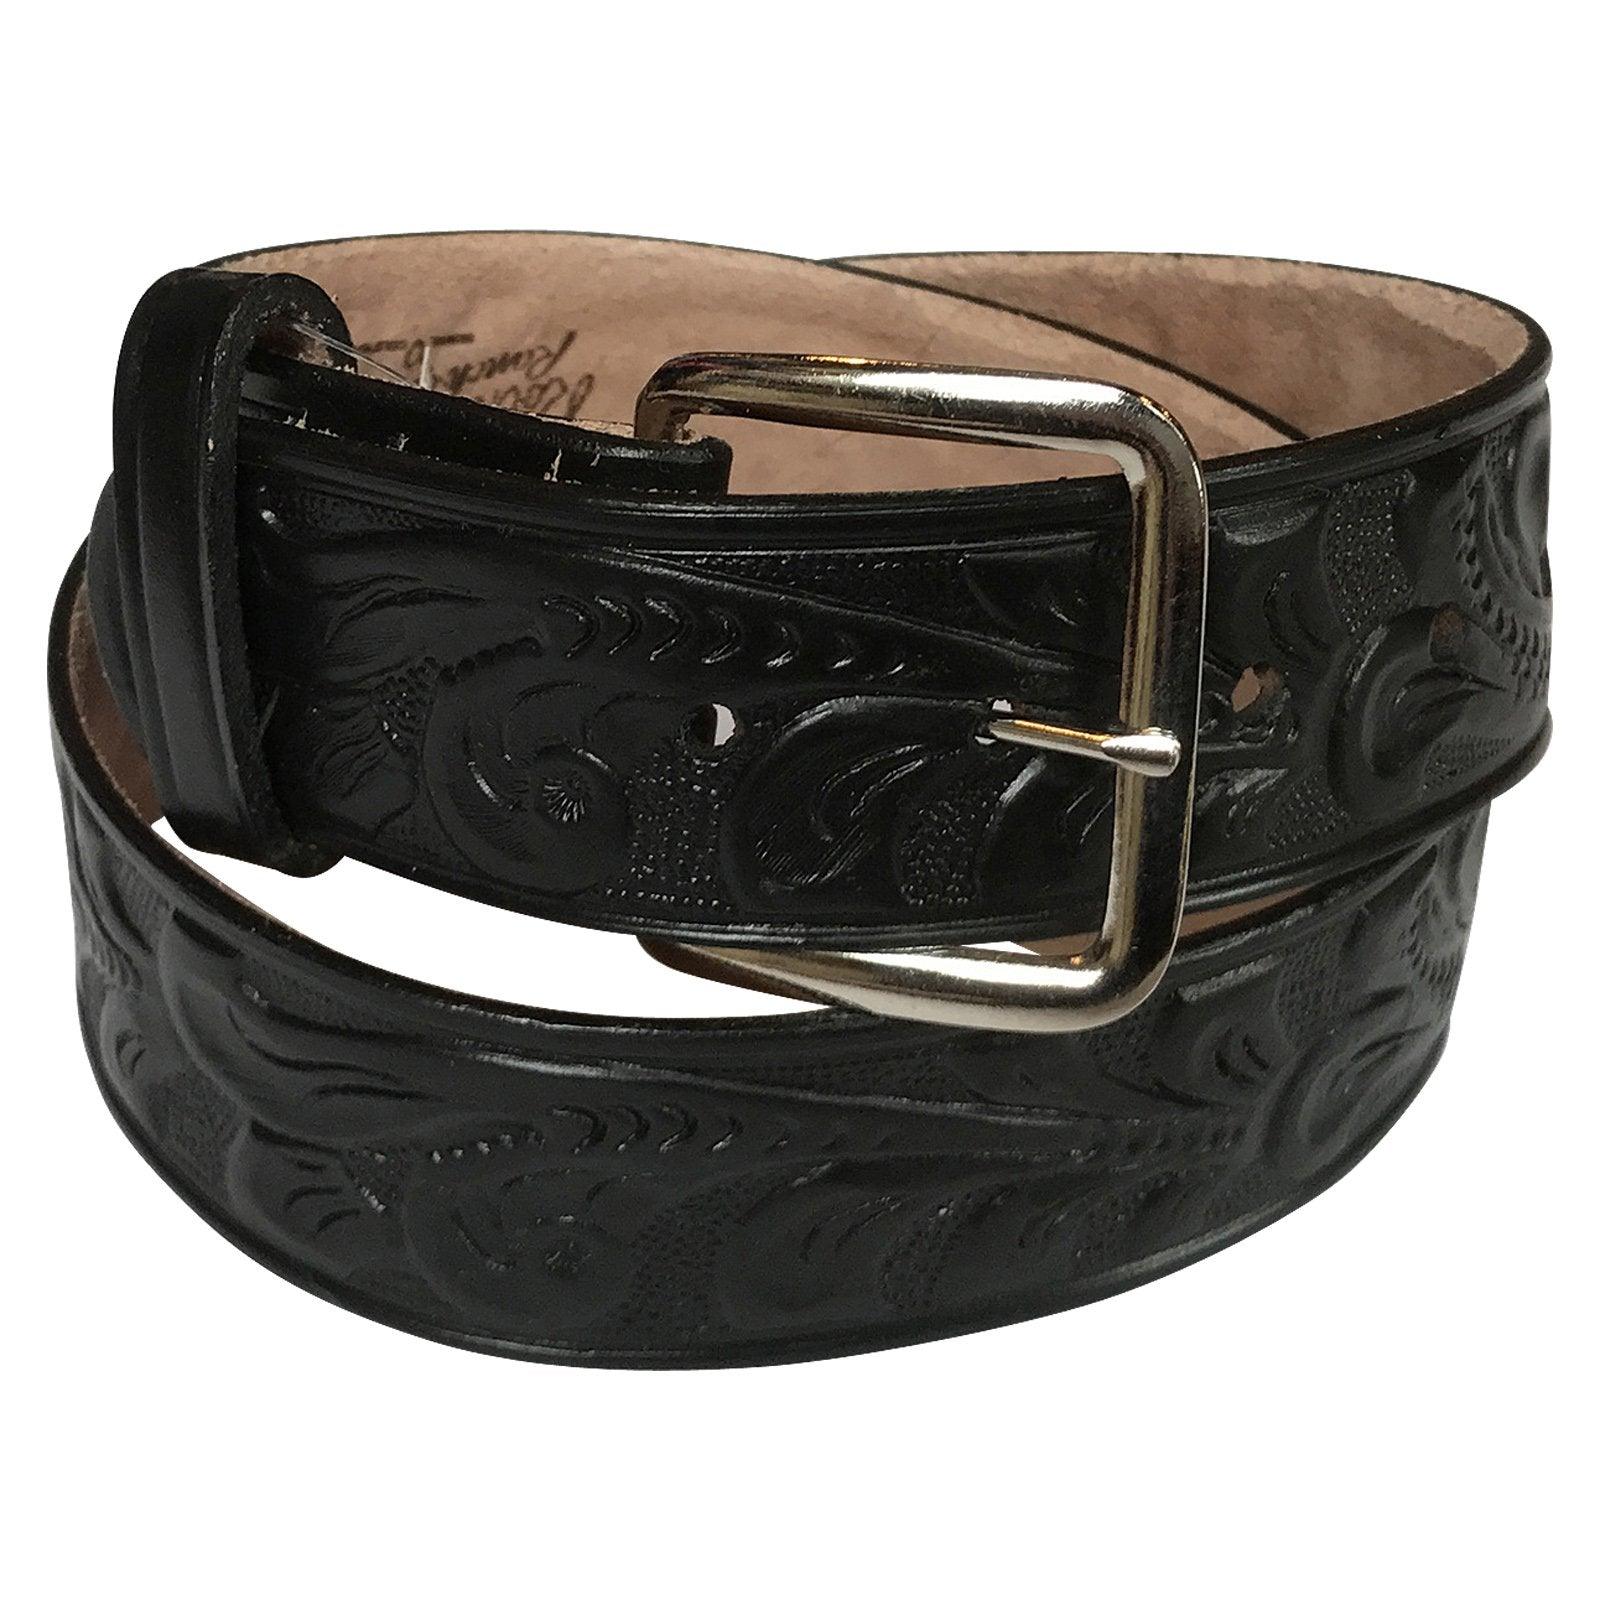 1pc Youth Pu Leather Belt With Bag Buckle And Embroidery